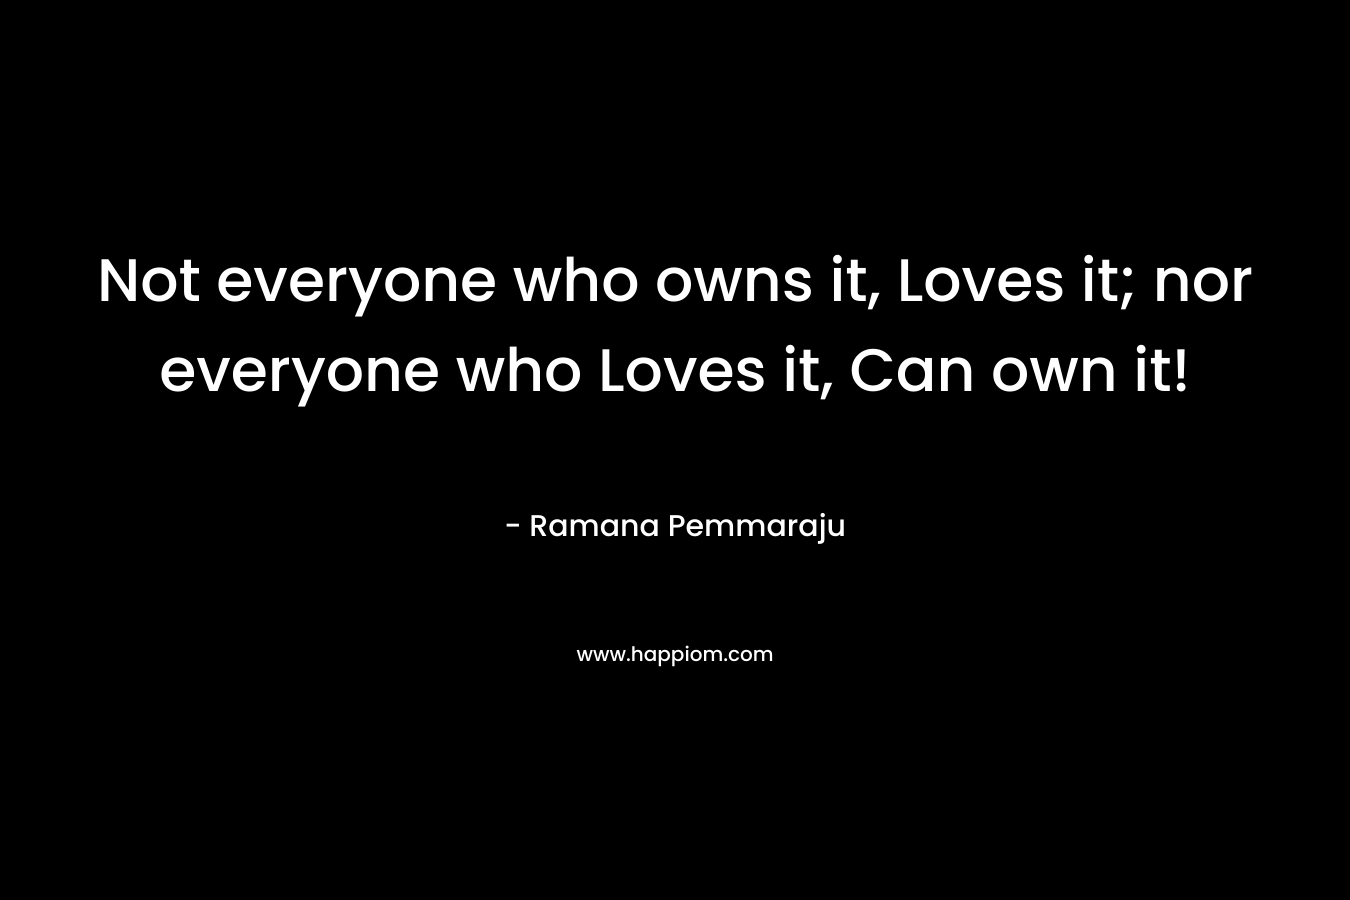 Not everyone who owns it, Loves it; nor everyone who Loves it, Can own it!